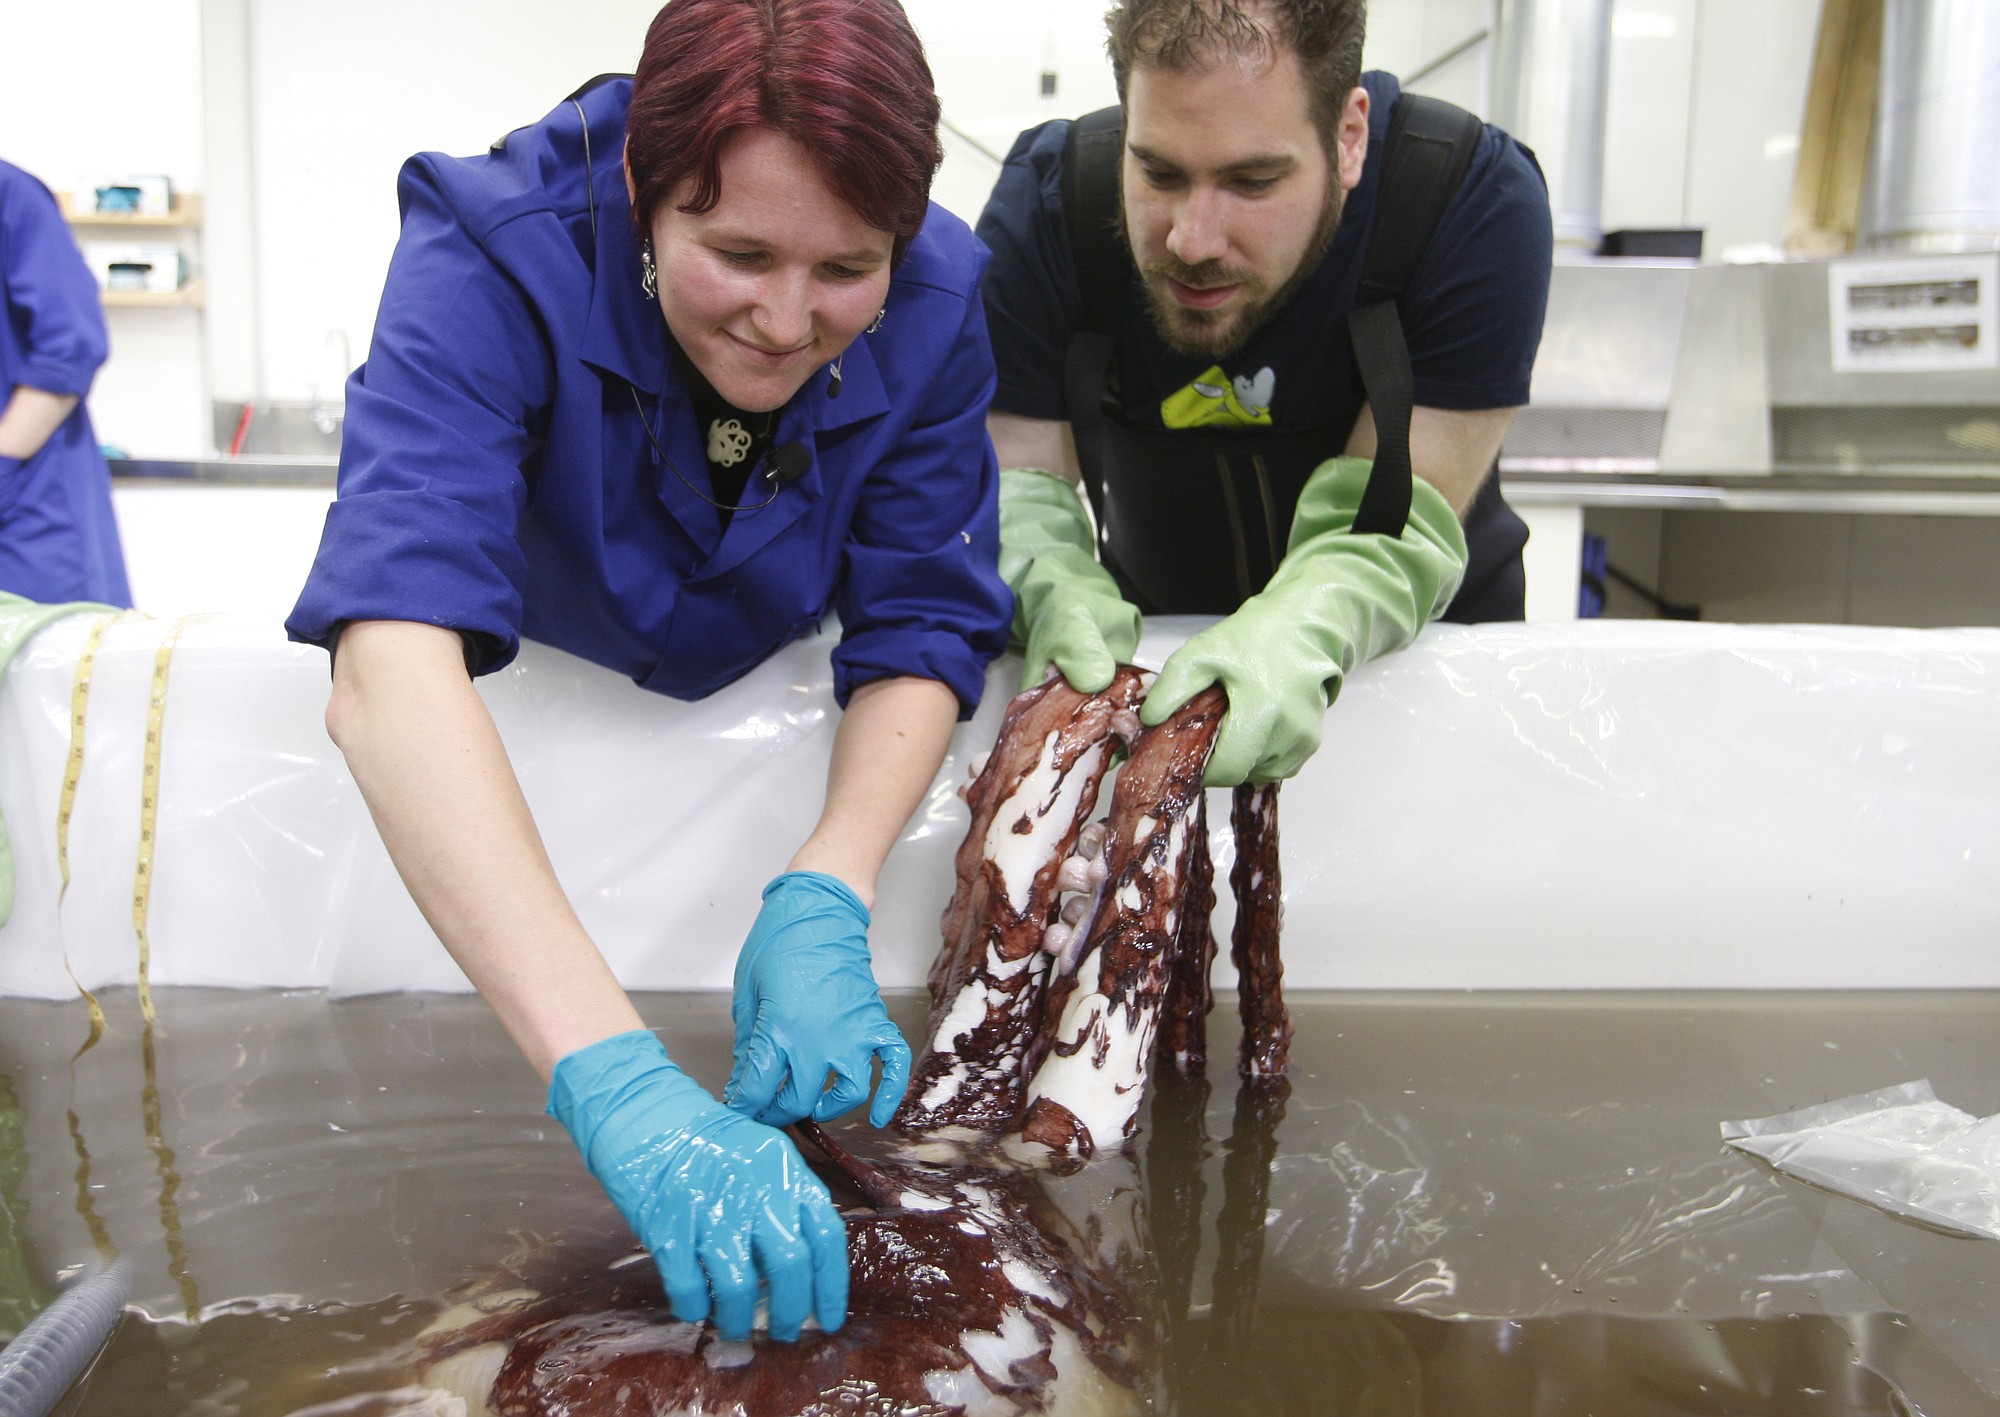 Scientist Kat Bolstad, left, from the Auckland University of Technology, and student Aaron Boyd Evans examine a colossal squid at a national museum facility Tuesday, Sept. 16, in Wellington, New Zealand.  The colossal squid, which weighs 770 pounds and is as long as a minibus, is one of the sea's most elusive species.